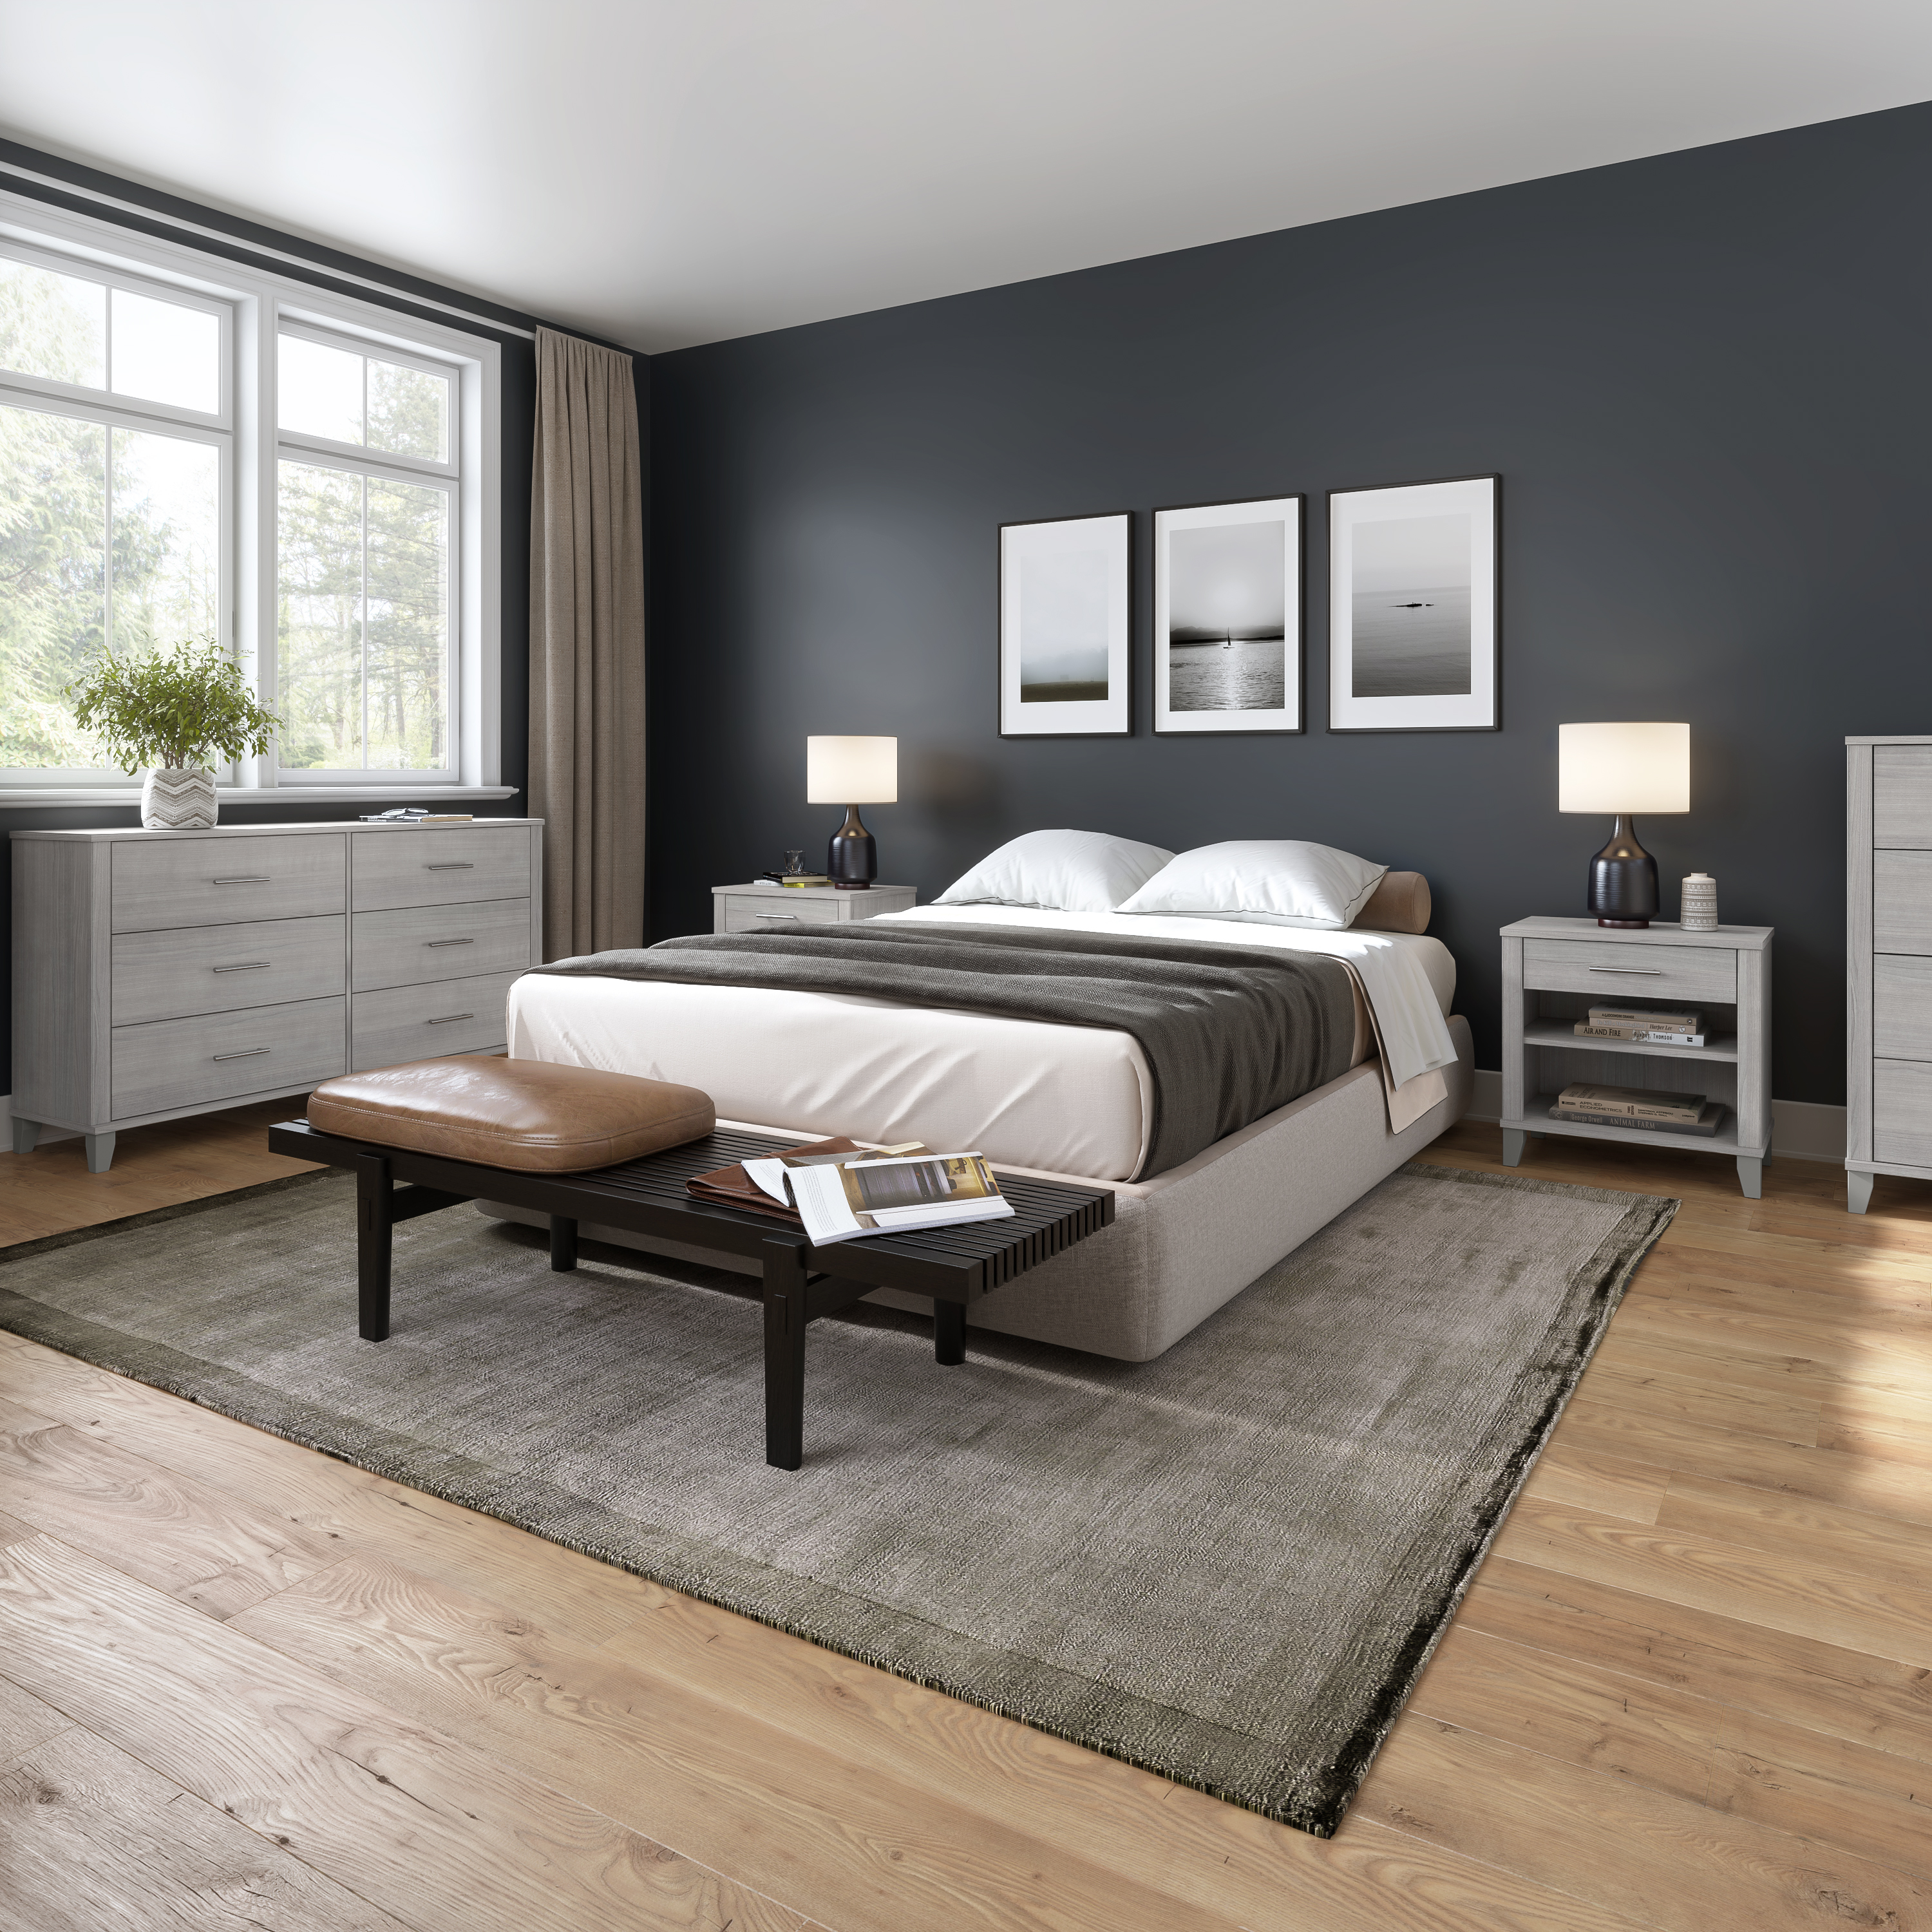 Shop Bush Furniture Somerset Full/Queen Size Headboard, Chest of Drawers and Nightstand Bedroom Set 09 SET005PG #color_platinum gray